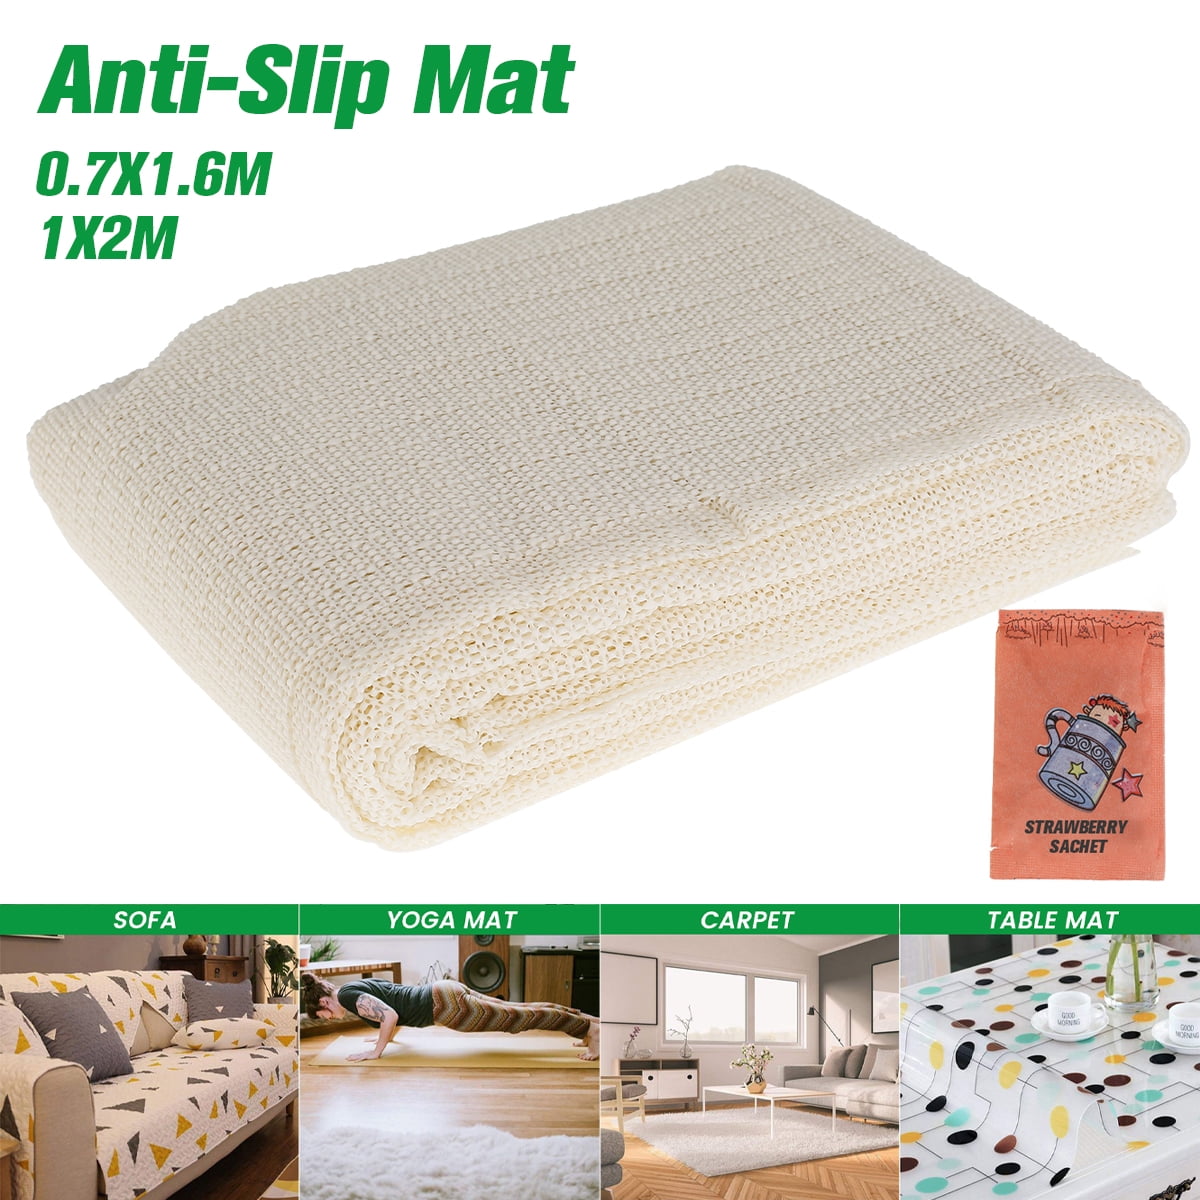 Grip-It Solid Grip Non-Slip Rug Pad for Area Rugs and Runner Rugs, Cushioned Rug Gripper for Hardwood Floors 2 x 6 ft